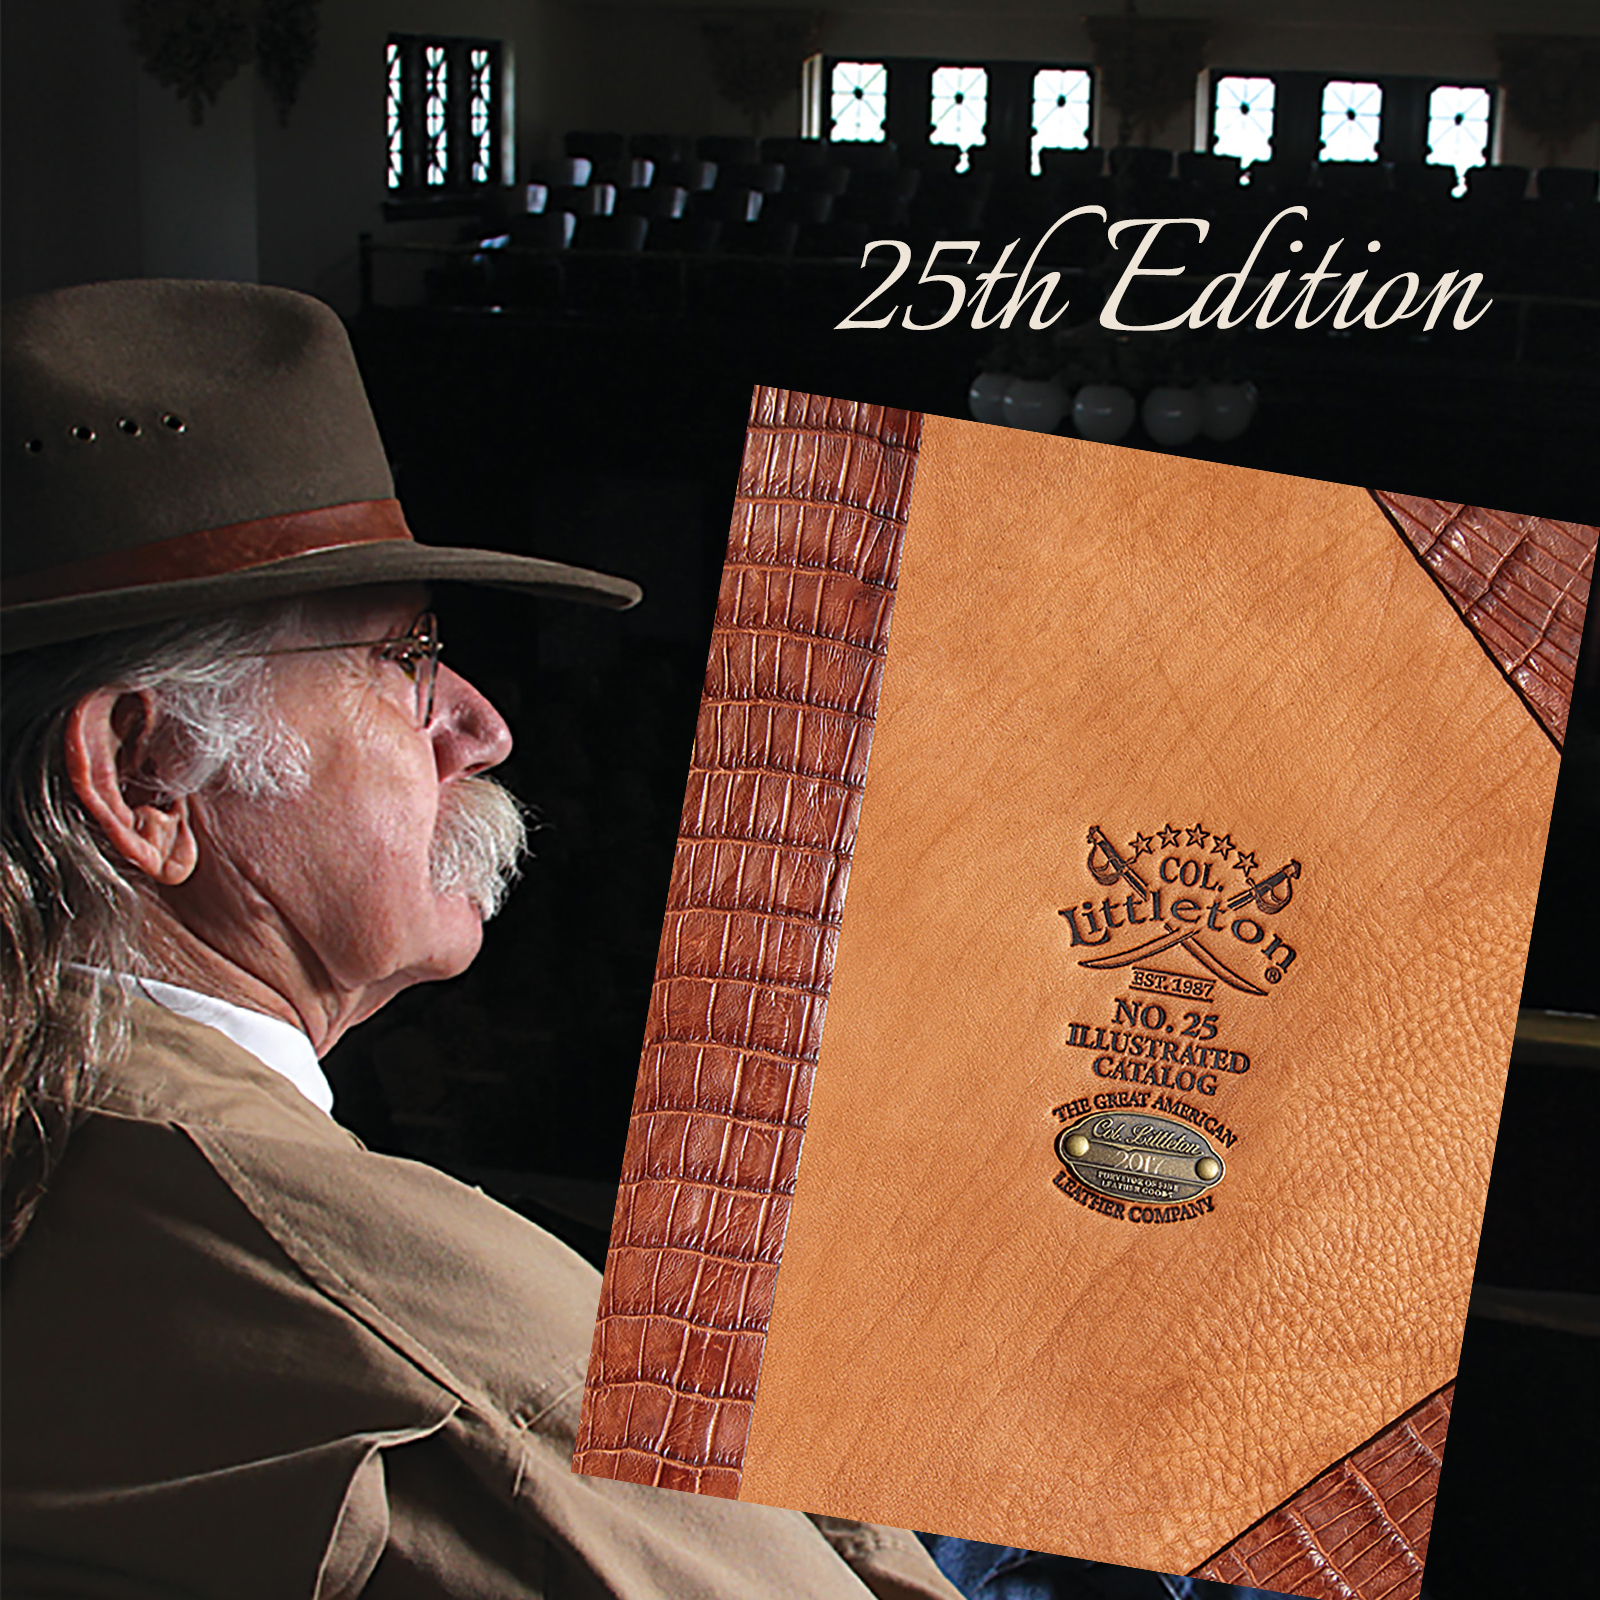 Side view of Colonel Littleton's Face with the cover of the 2017 Catalog and the words 25th Edition